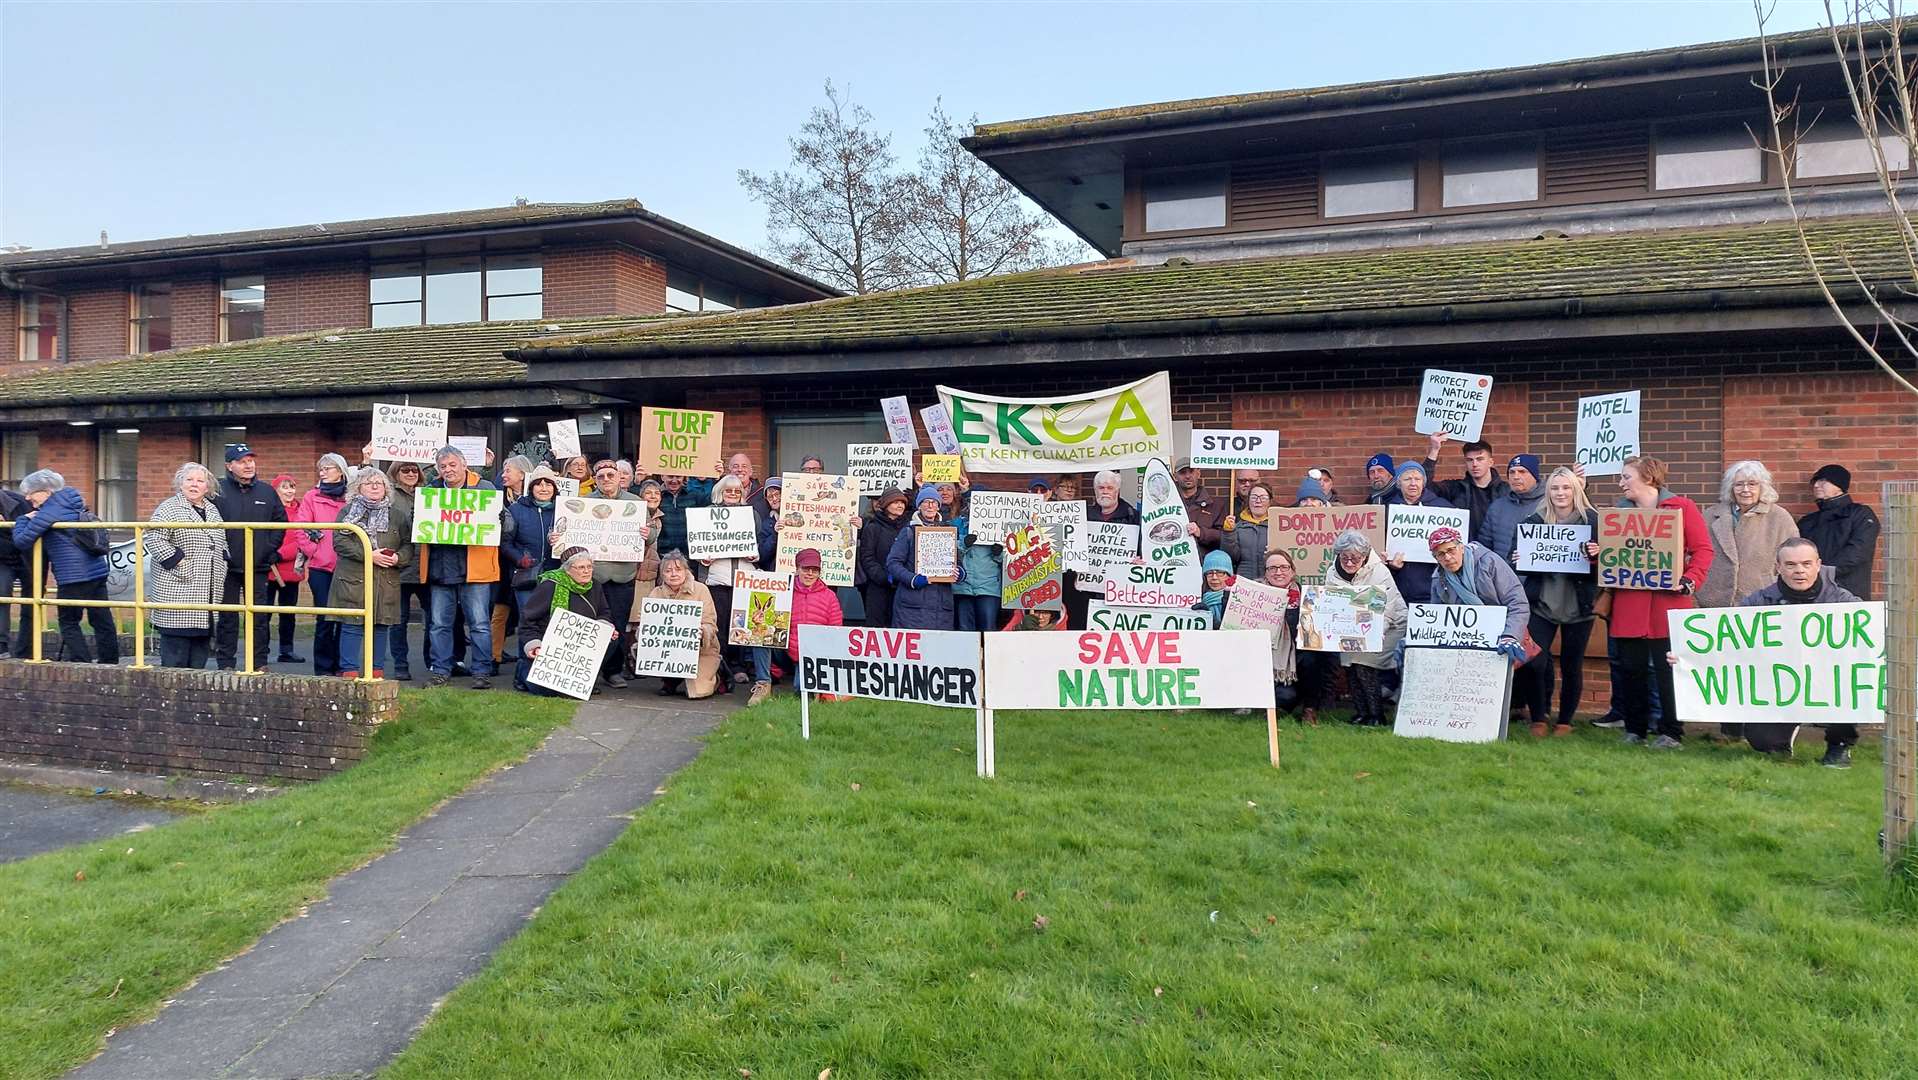 Those against development at Betteshanger Country Park gathered in protest before the planning meeting